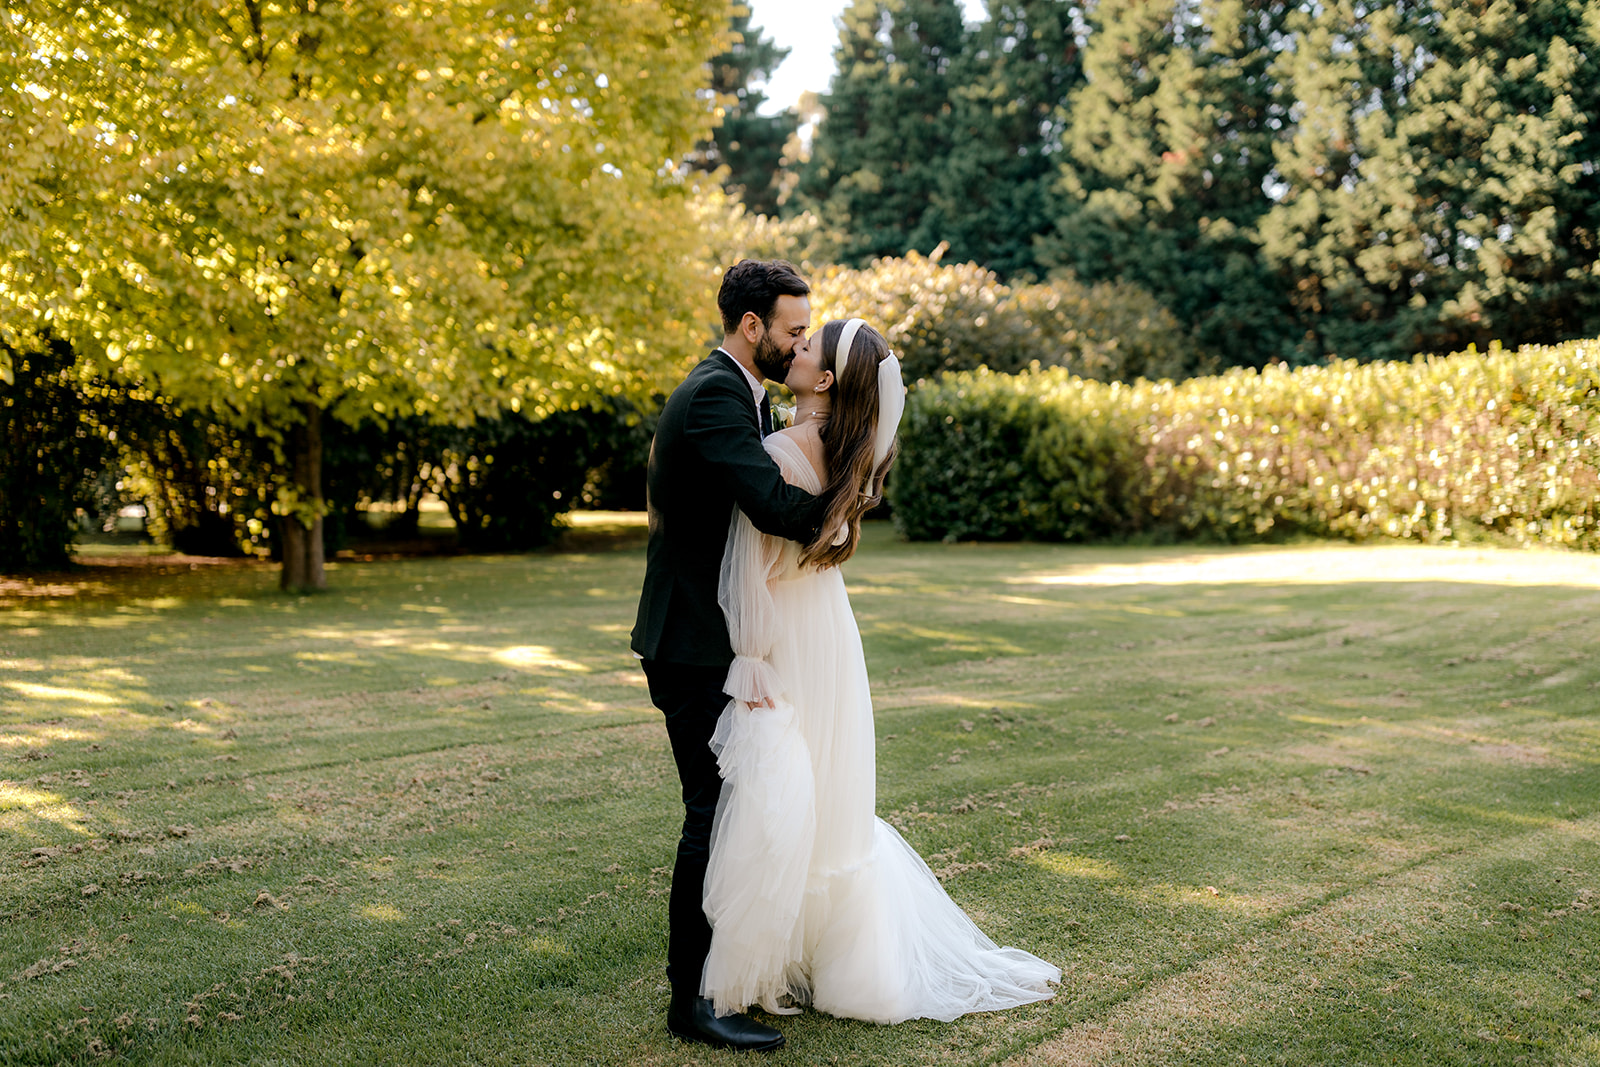 Portrait of bride & groom dancing in an English-inspired garden during their elegant country wedding.